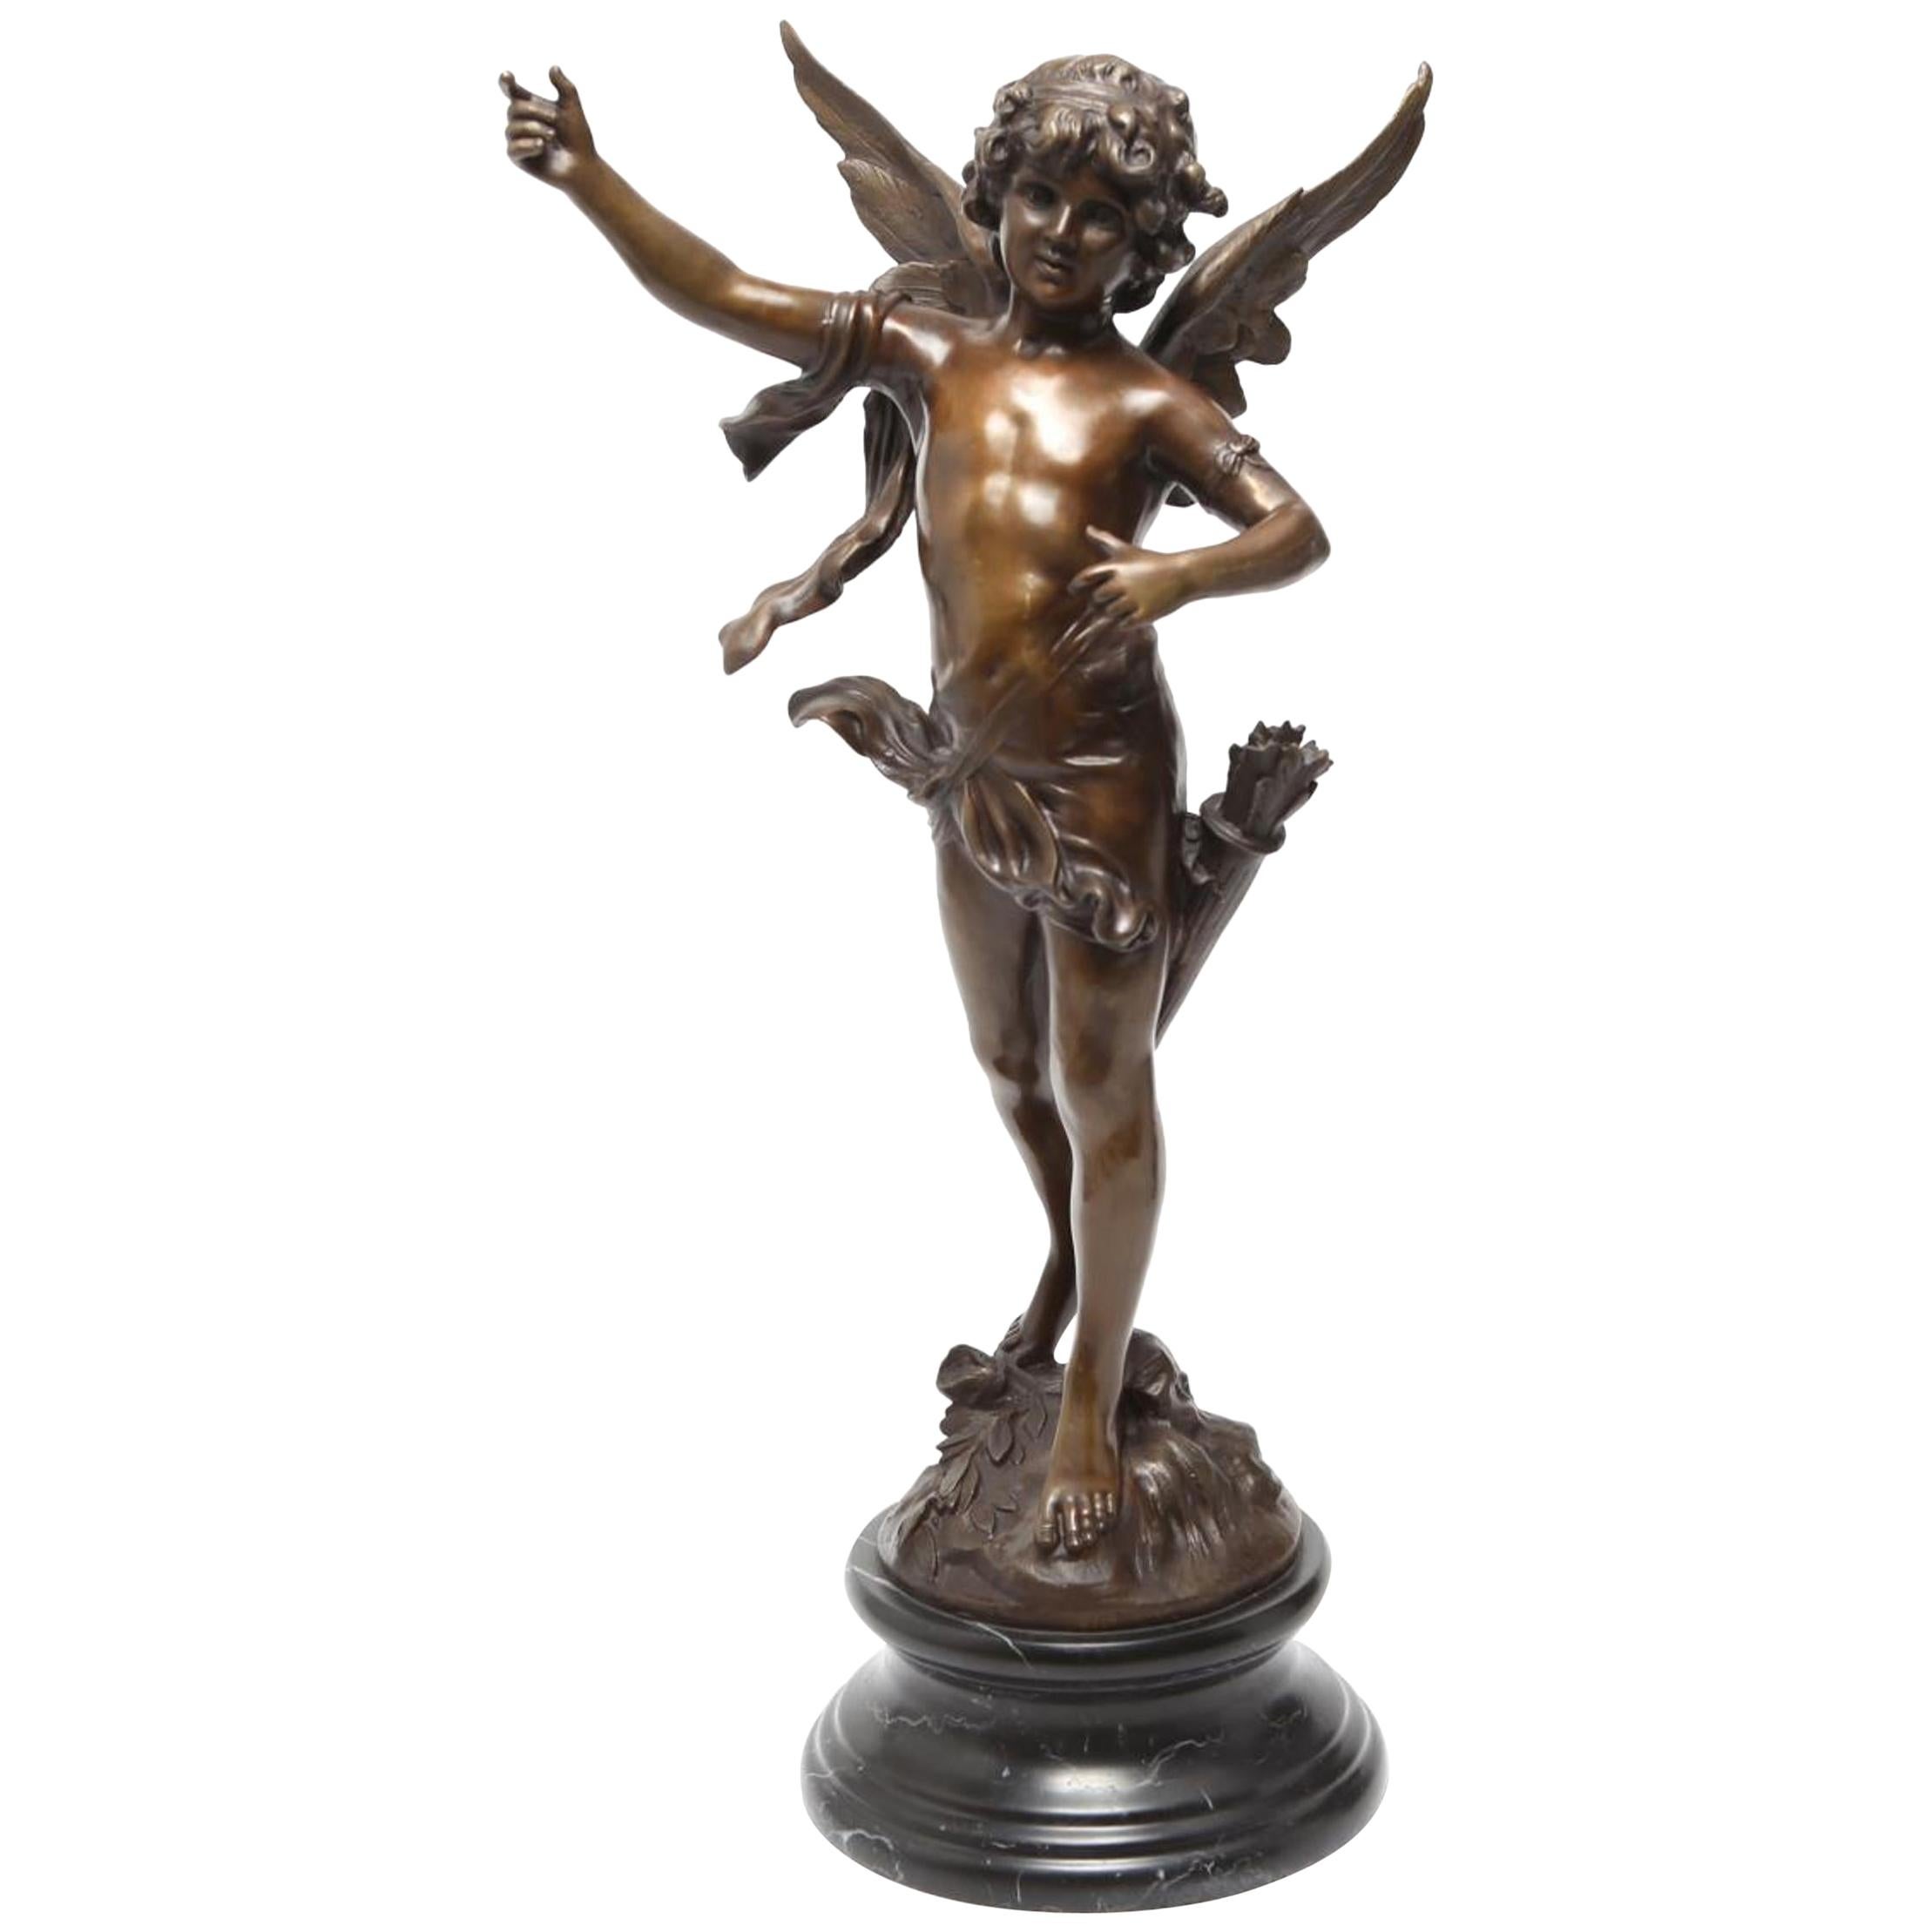 French Neoclassical Revival 'Cupidon' Bronze Sculpture after Auguste Moreau